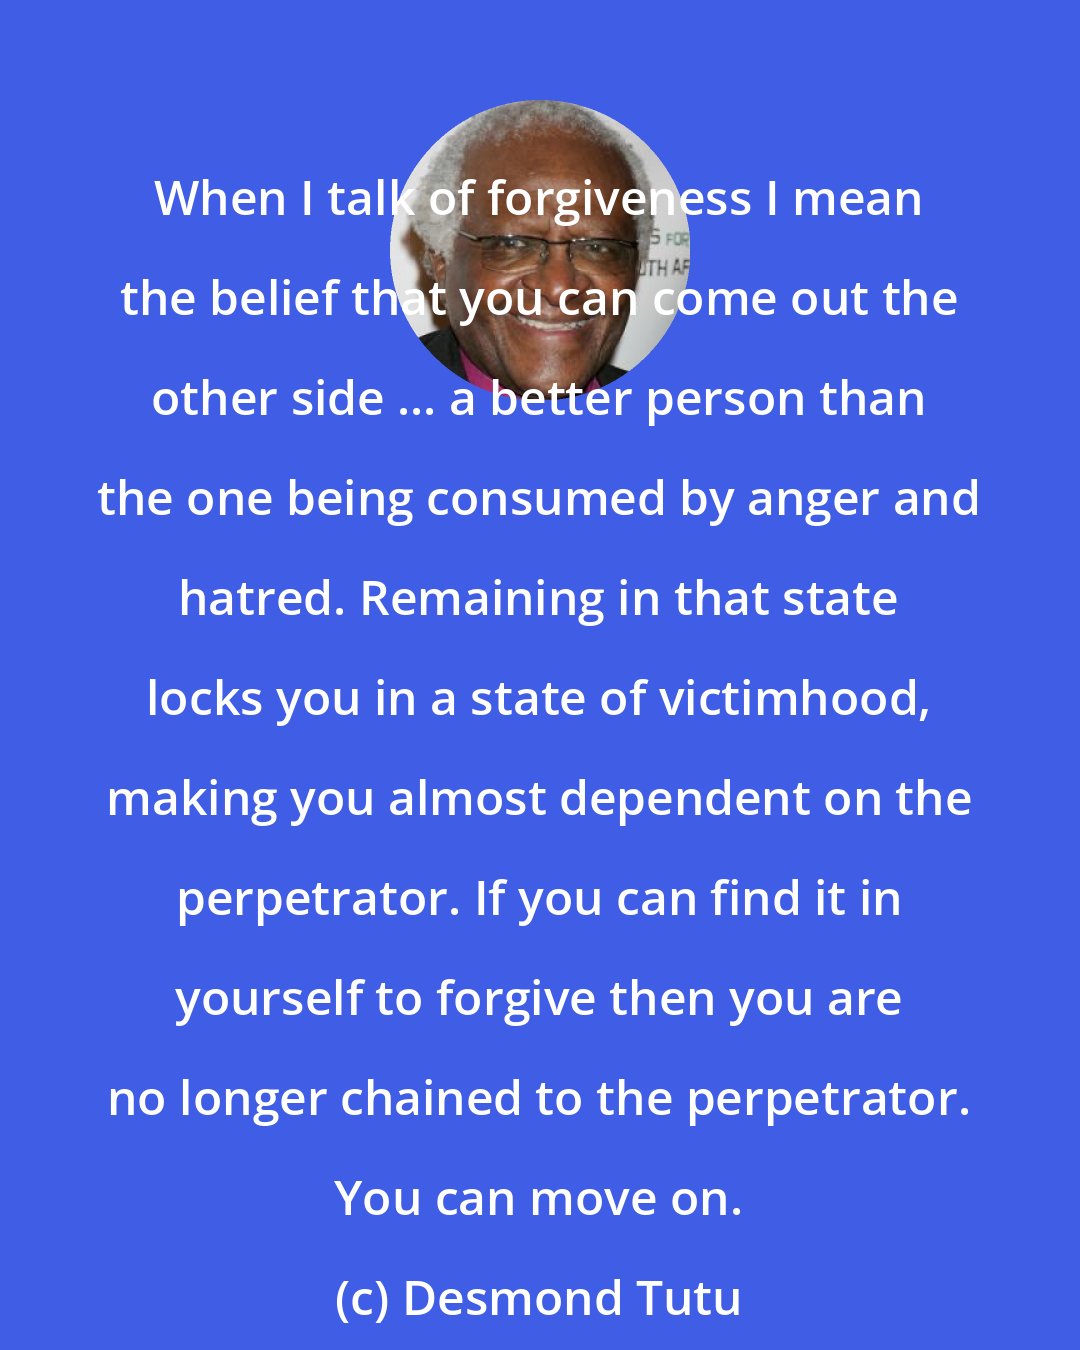 Desmond Tutu: When I talk of forgiveness I mean the belief that you can come out the other side ... a better person than the one being consumed by anger and hatred. Remaining in that state locks you in a state of victimhood, making you almost dependent on the perpetrator. If you can find it in yourself to forgive then you are no longer chained to the perpetrator. You can move on.